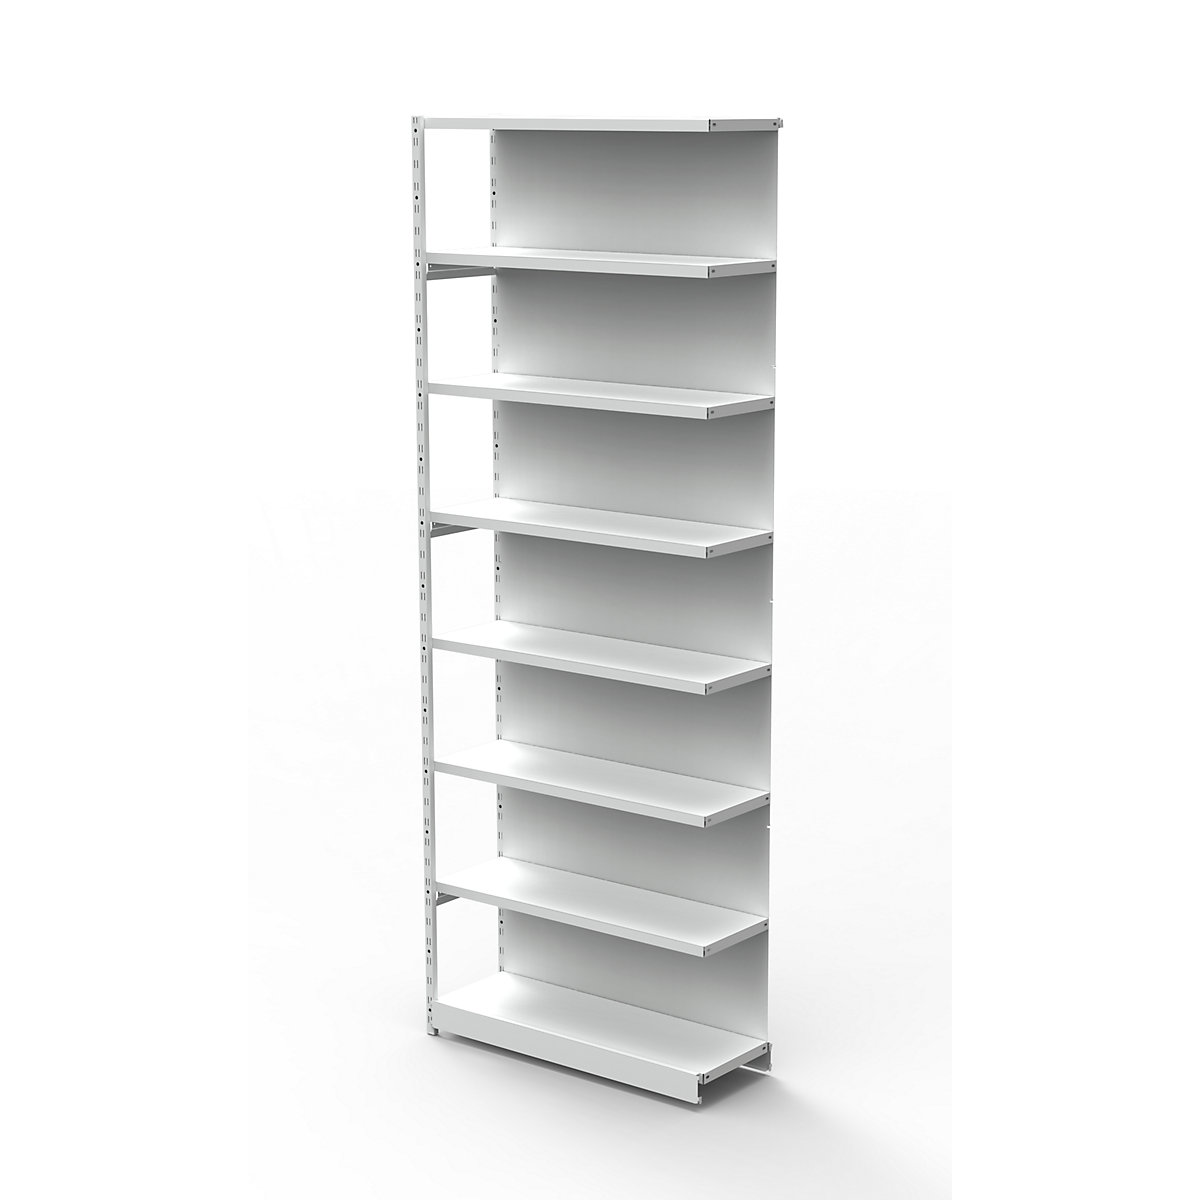 Boltless office shelving unit, with rear wall